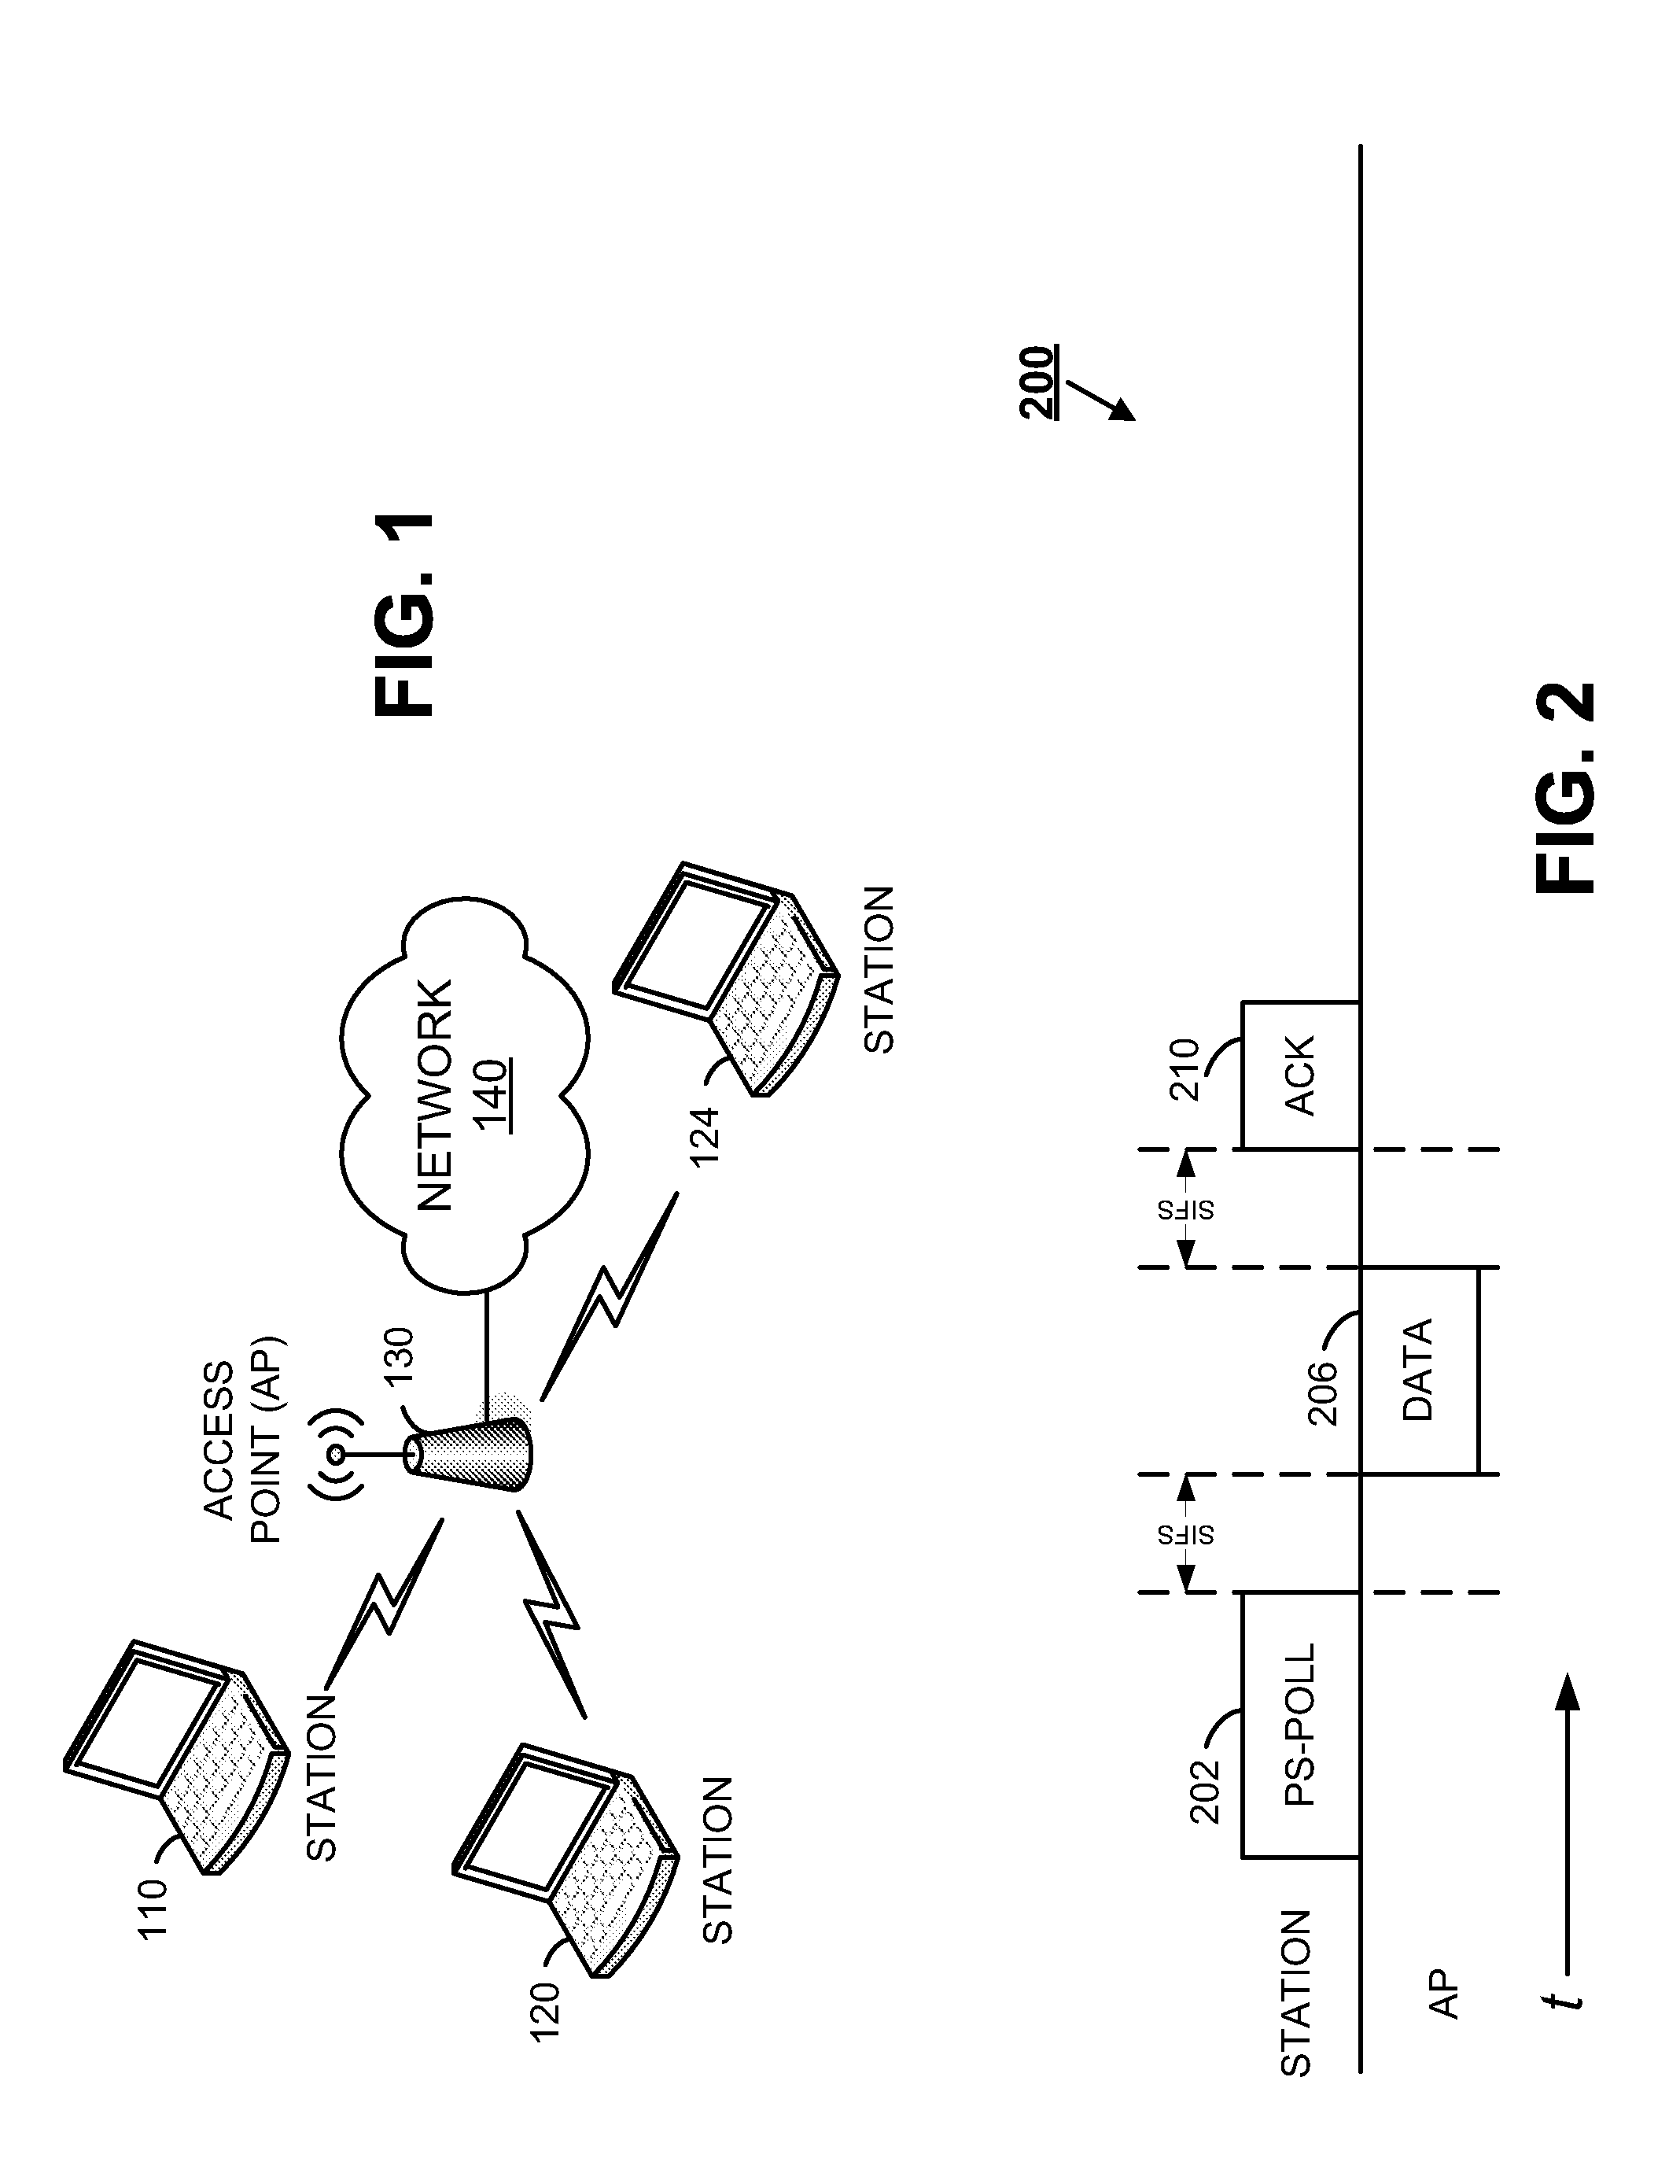 Systems and Methods for Indicating Buffered Data at an Access Point Using an Embedded Traffic Indication Map